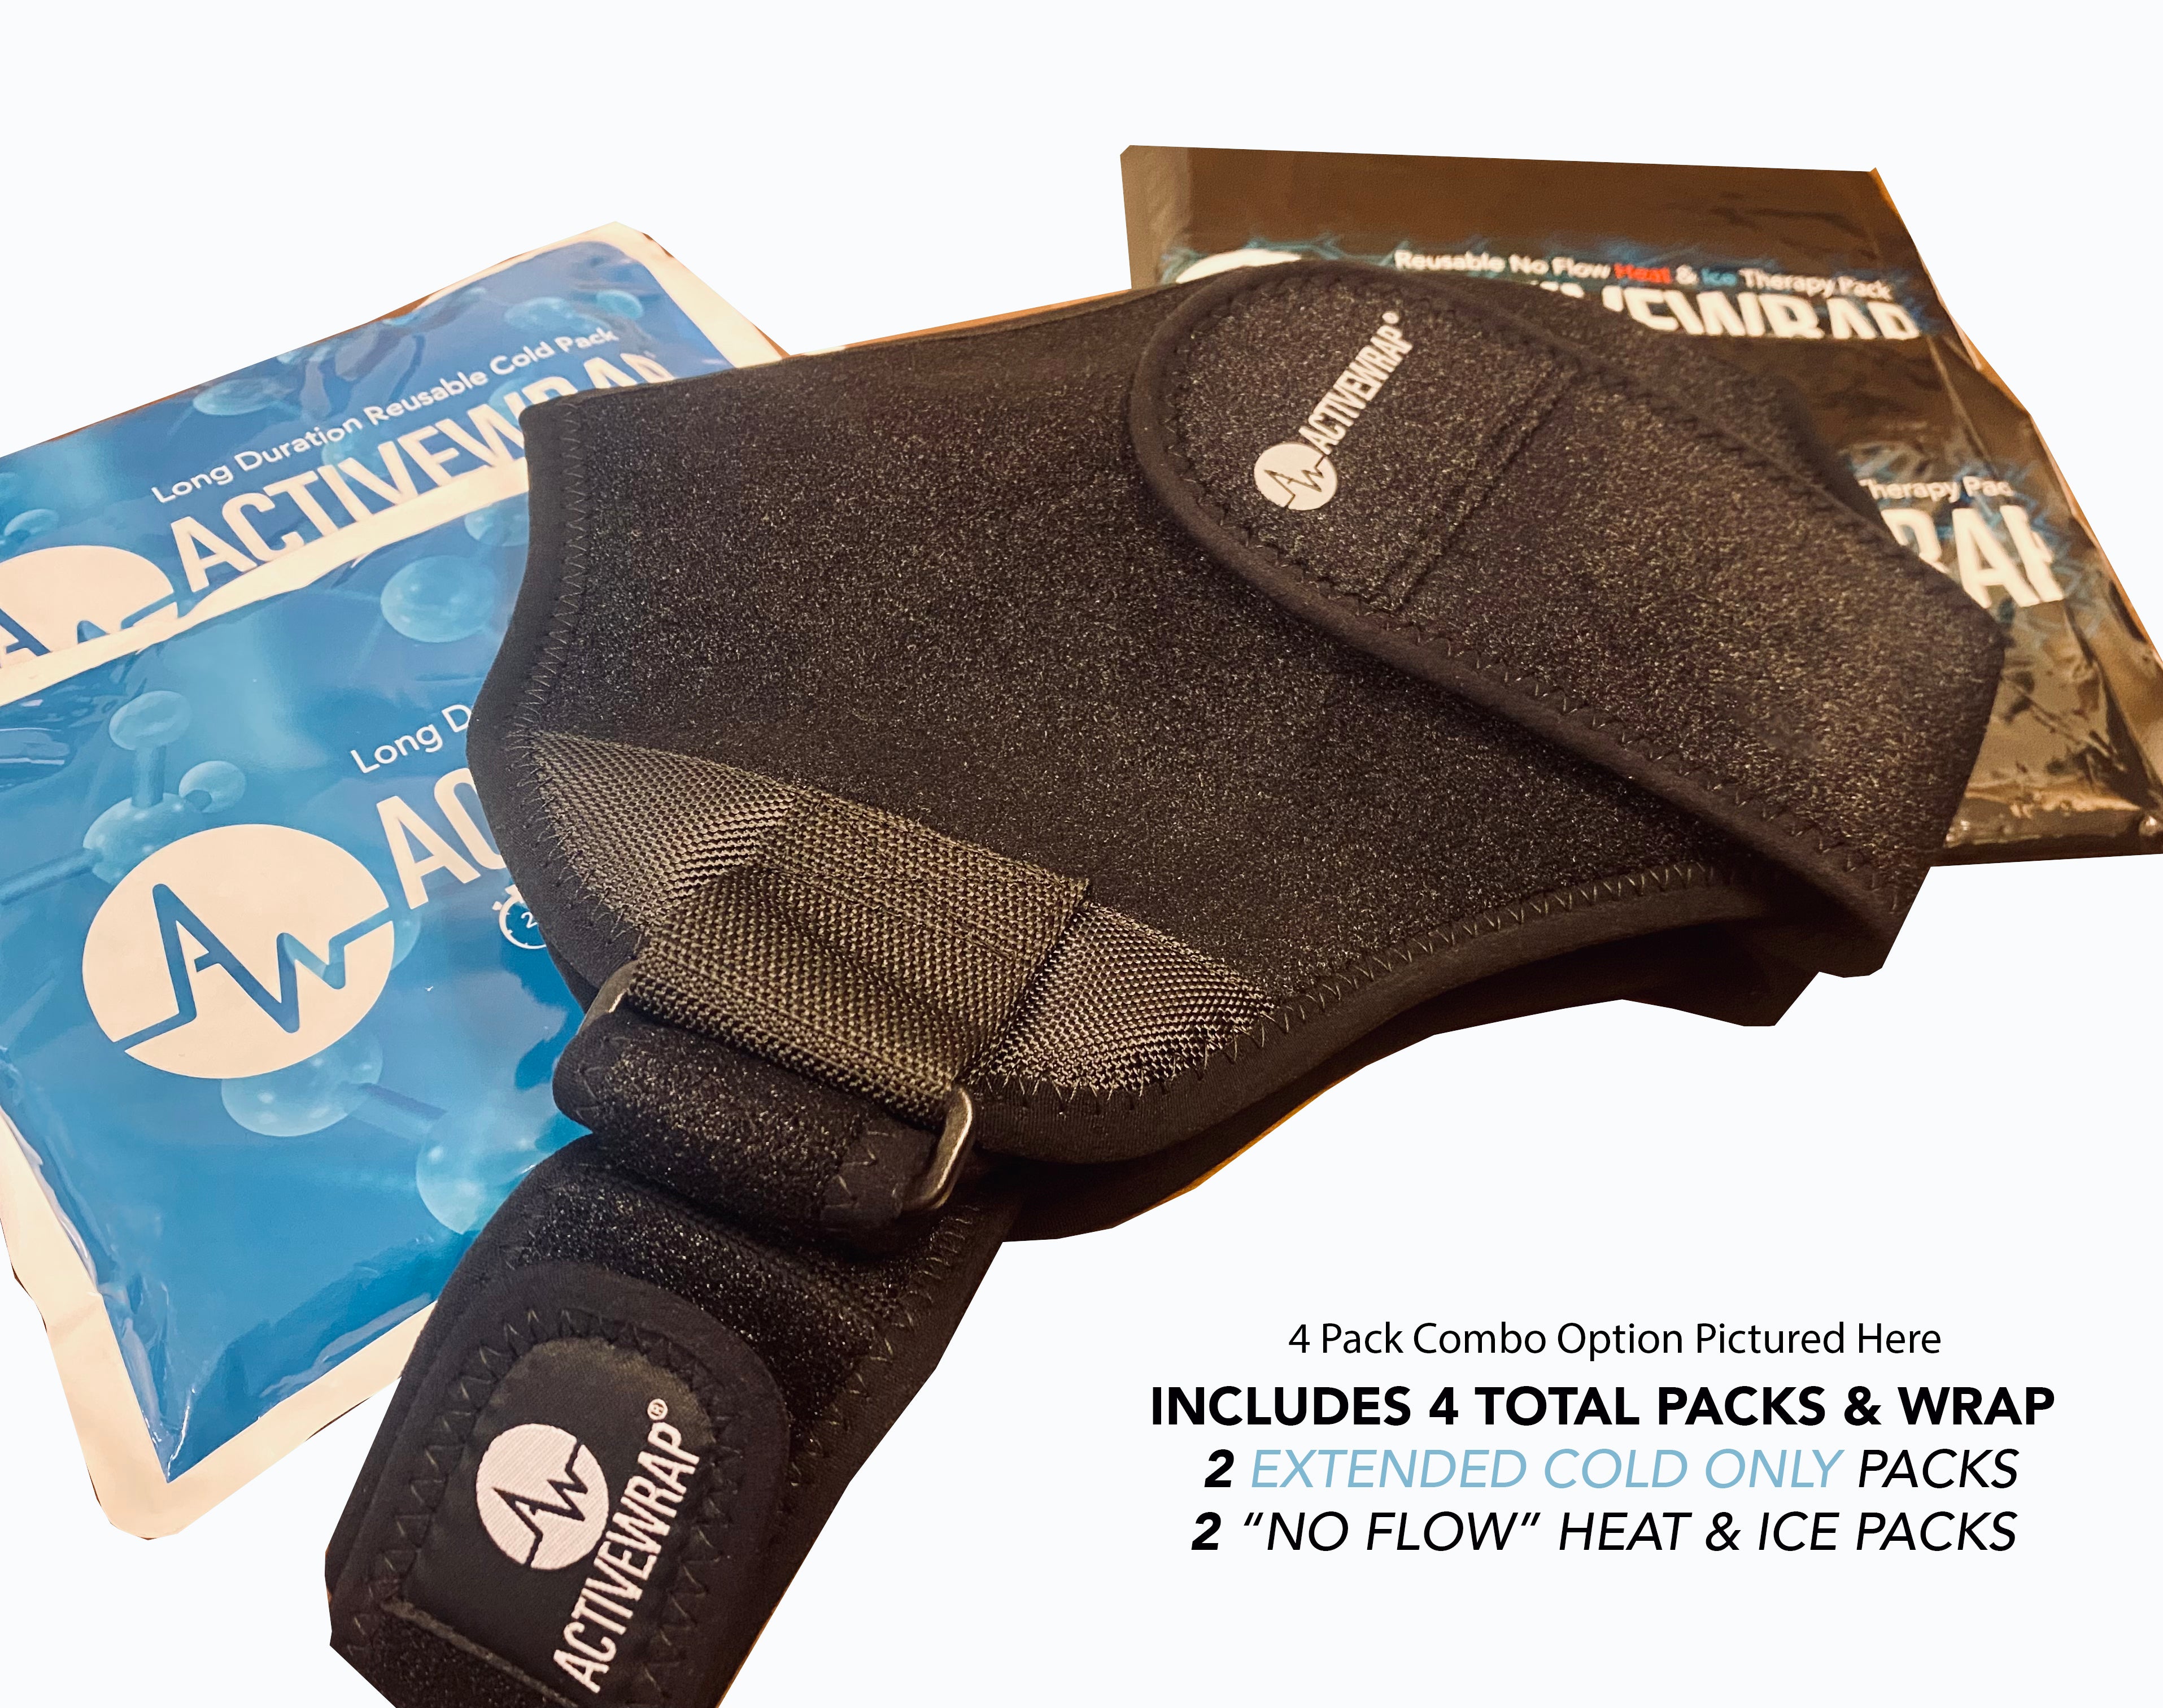 Shoulder Therapy, Shoulder Ice Wrap, Shoulder Ice Pack, Rotator Cuff Repair, Post Op Shoulder Recovery, Shoulder Pain Relief, Long Lasting Ice Packs